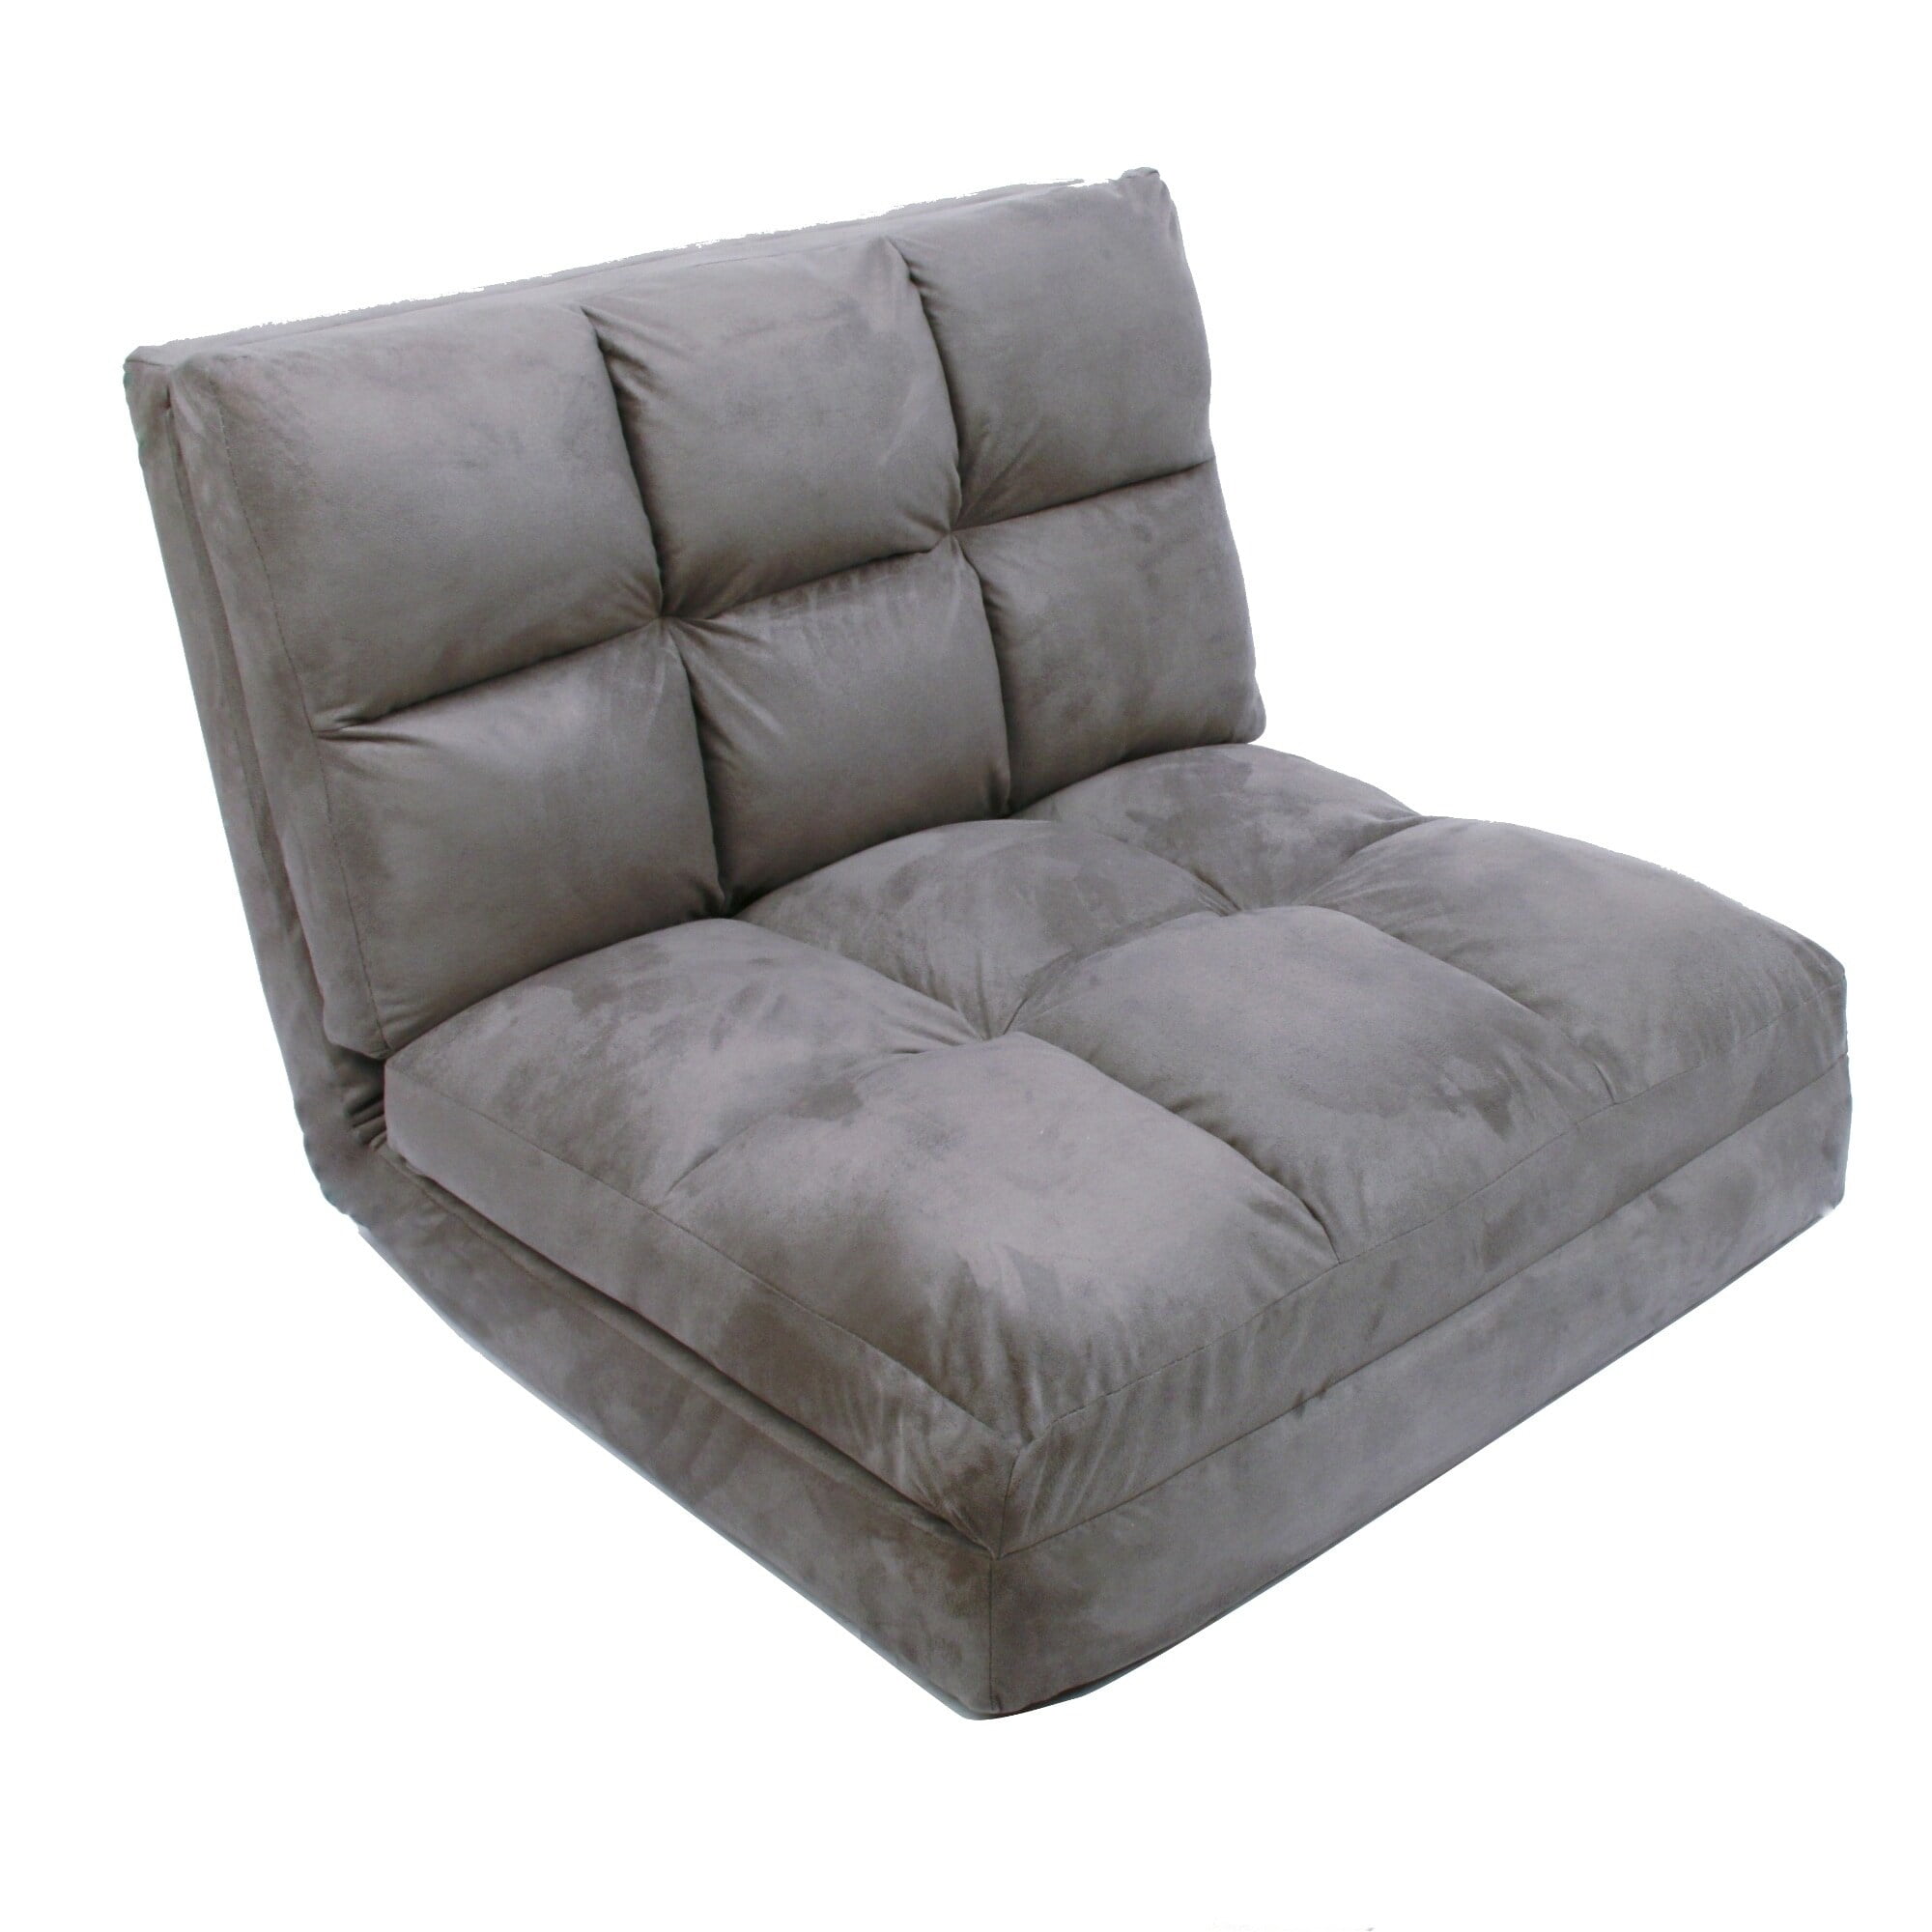 Loungie Microsuede 5position Convertible Flip Chair